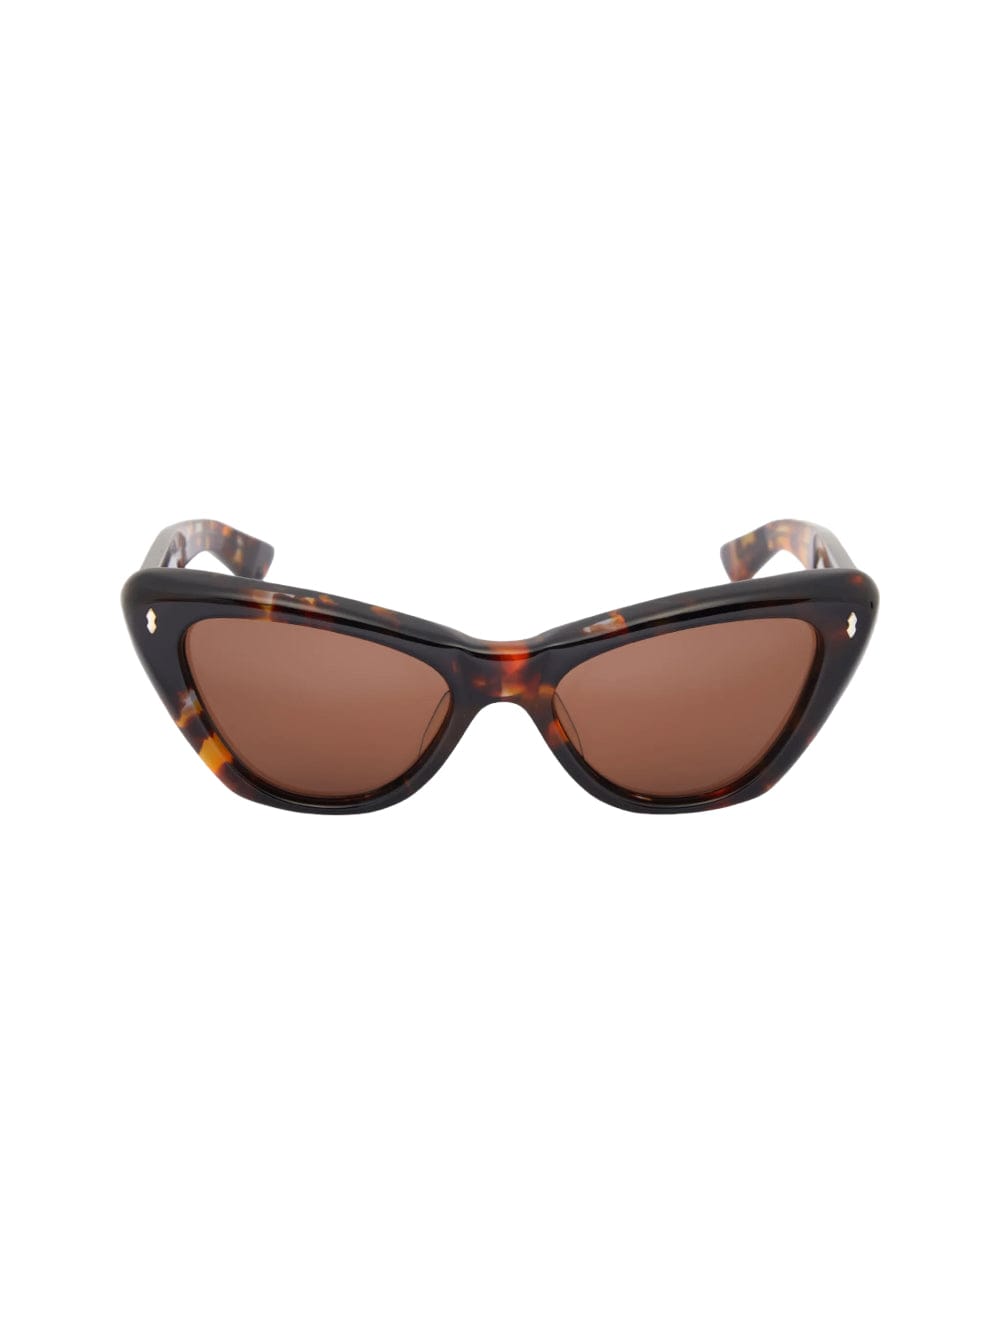 Jacques Marie Mage Kelly - Tortoise Sunglasses In Red